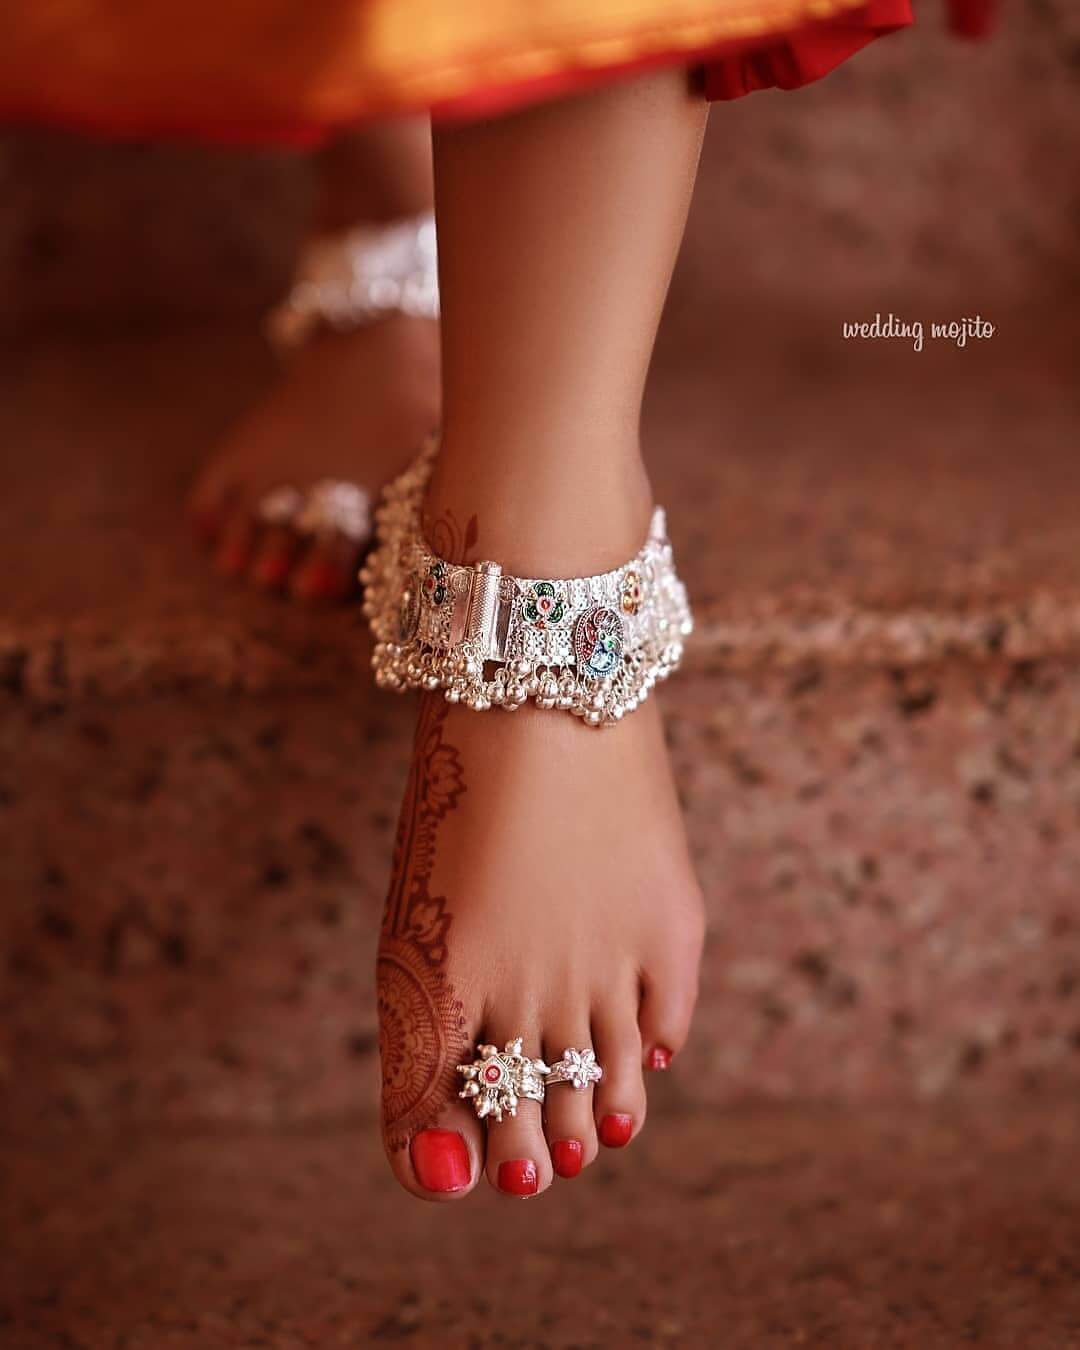 Indian Bridal Payal Design Bright Silver Segmented Silver Anklets With Ghungroo